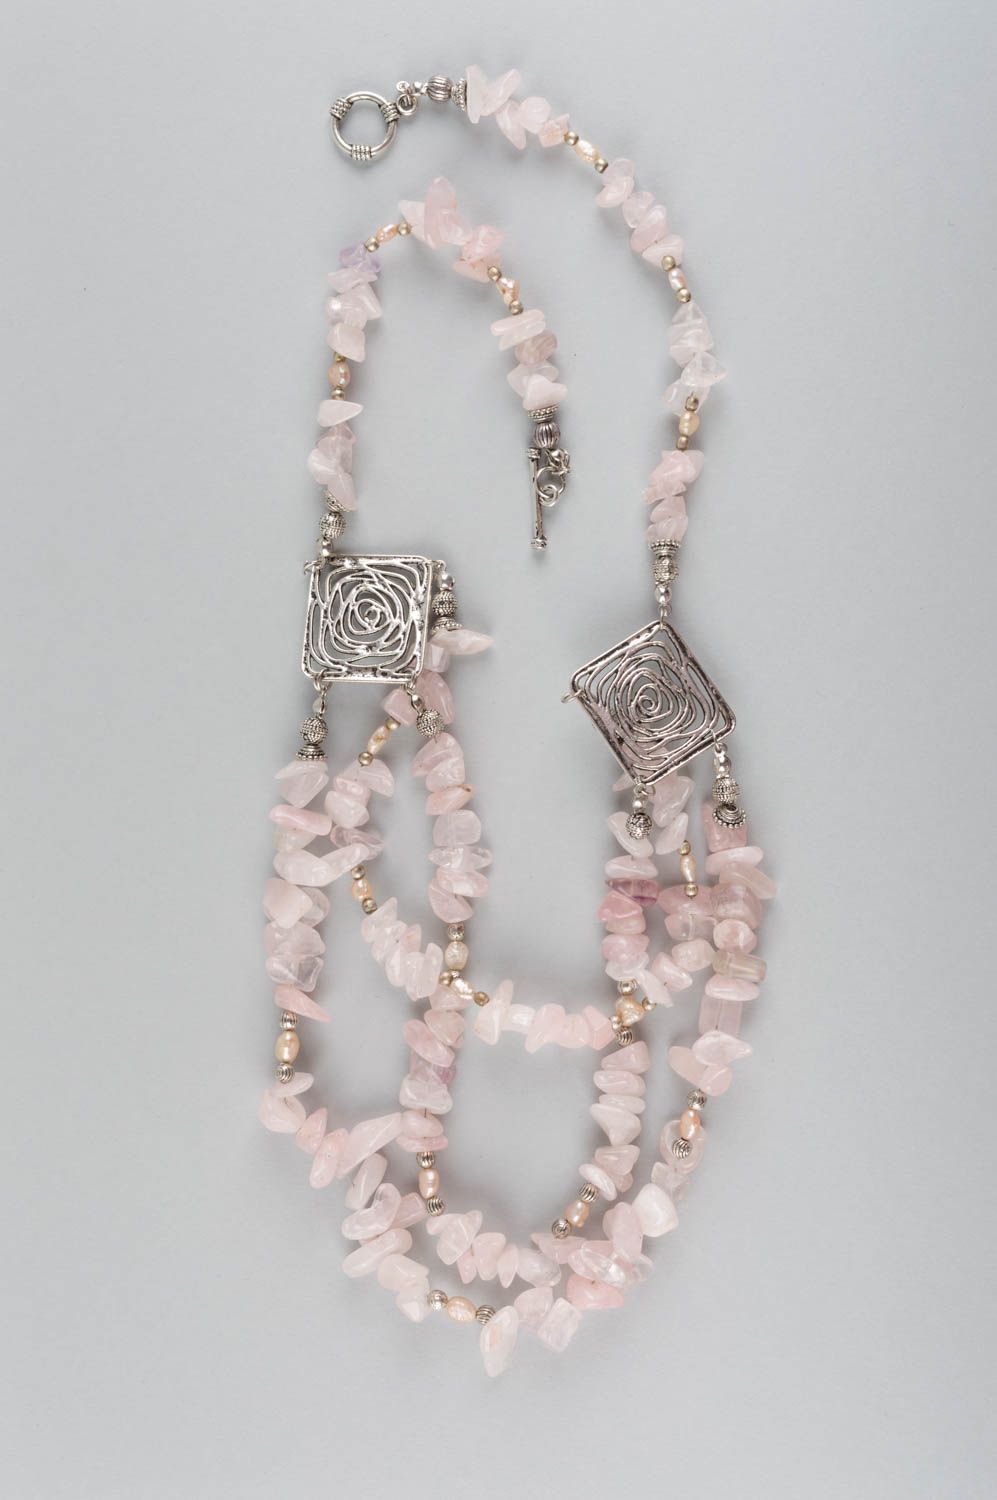 Handmade designer multi row necklace with pink quartz and metal elements photo 2